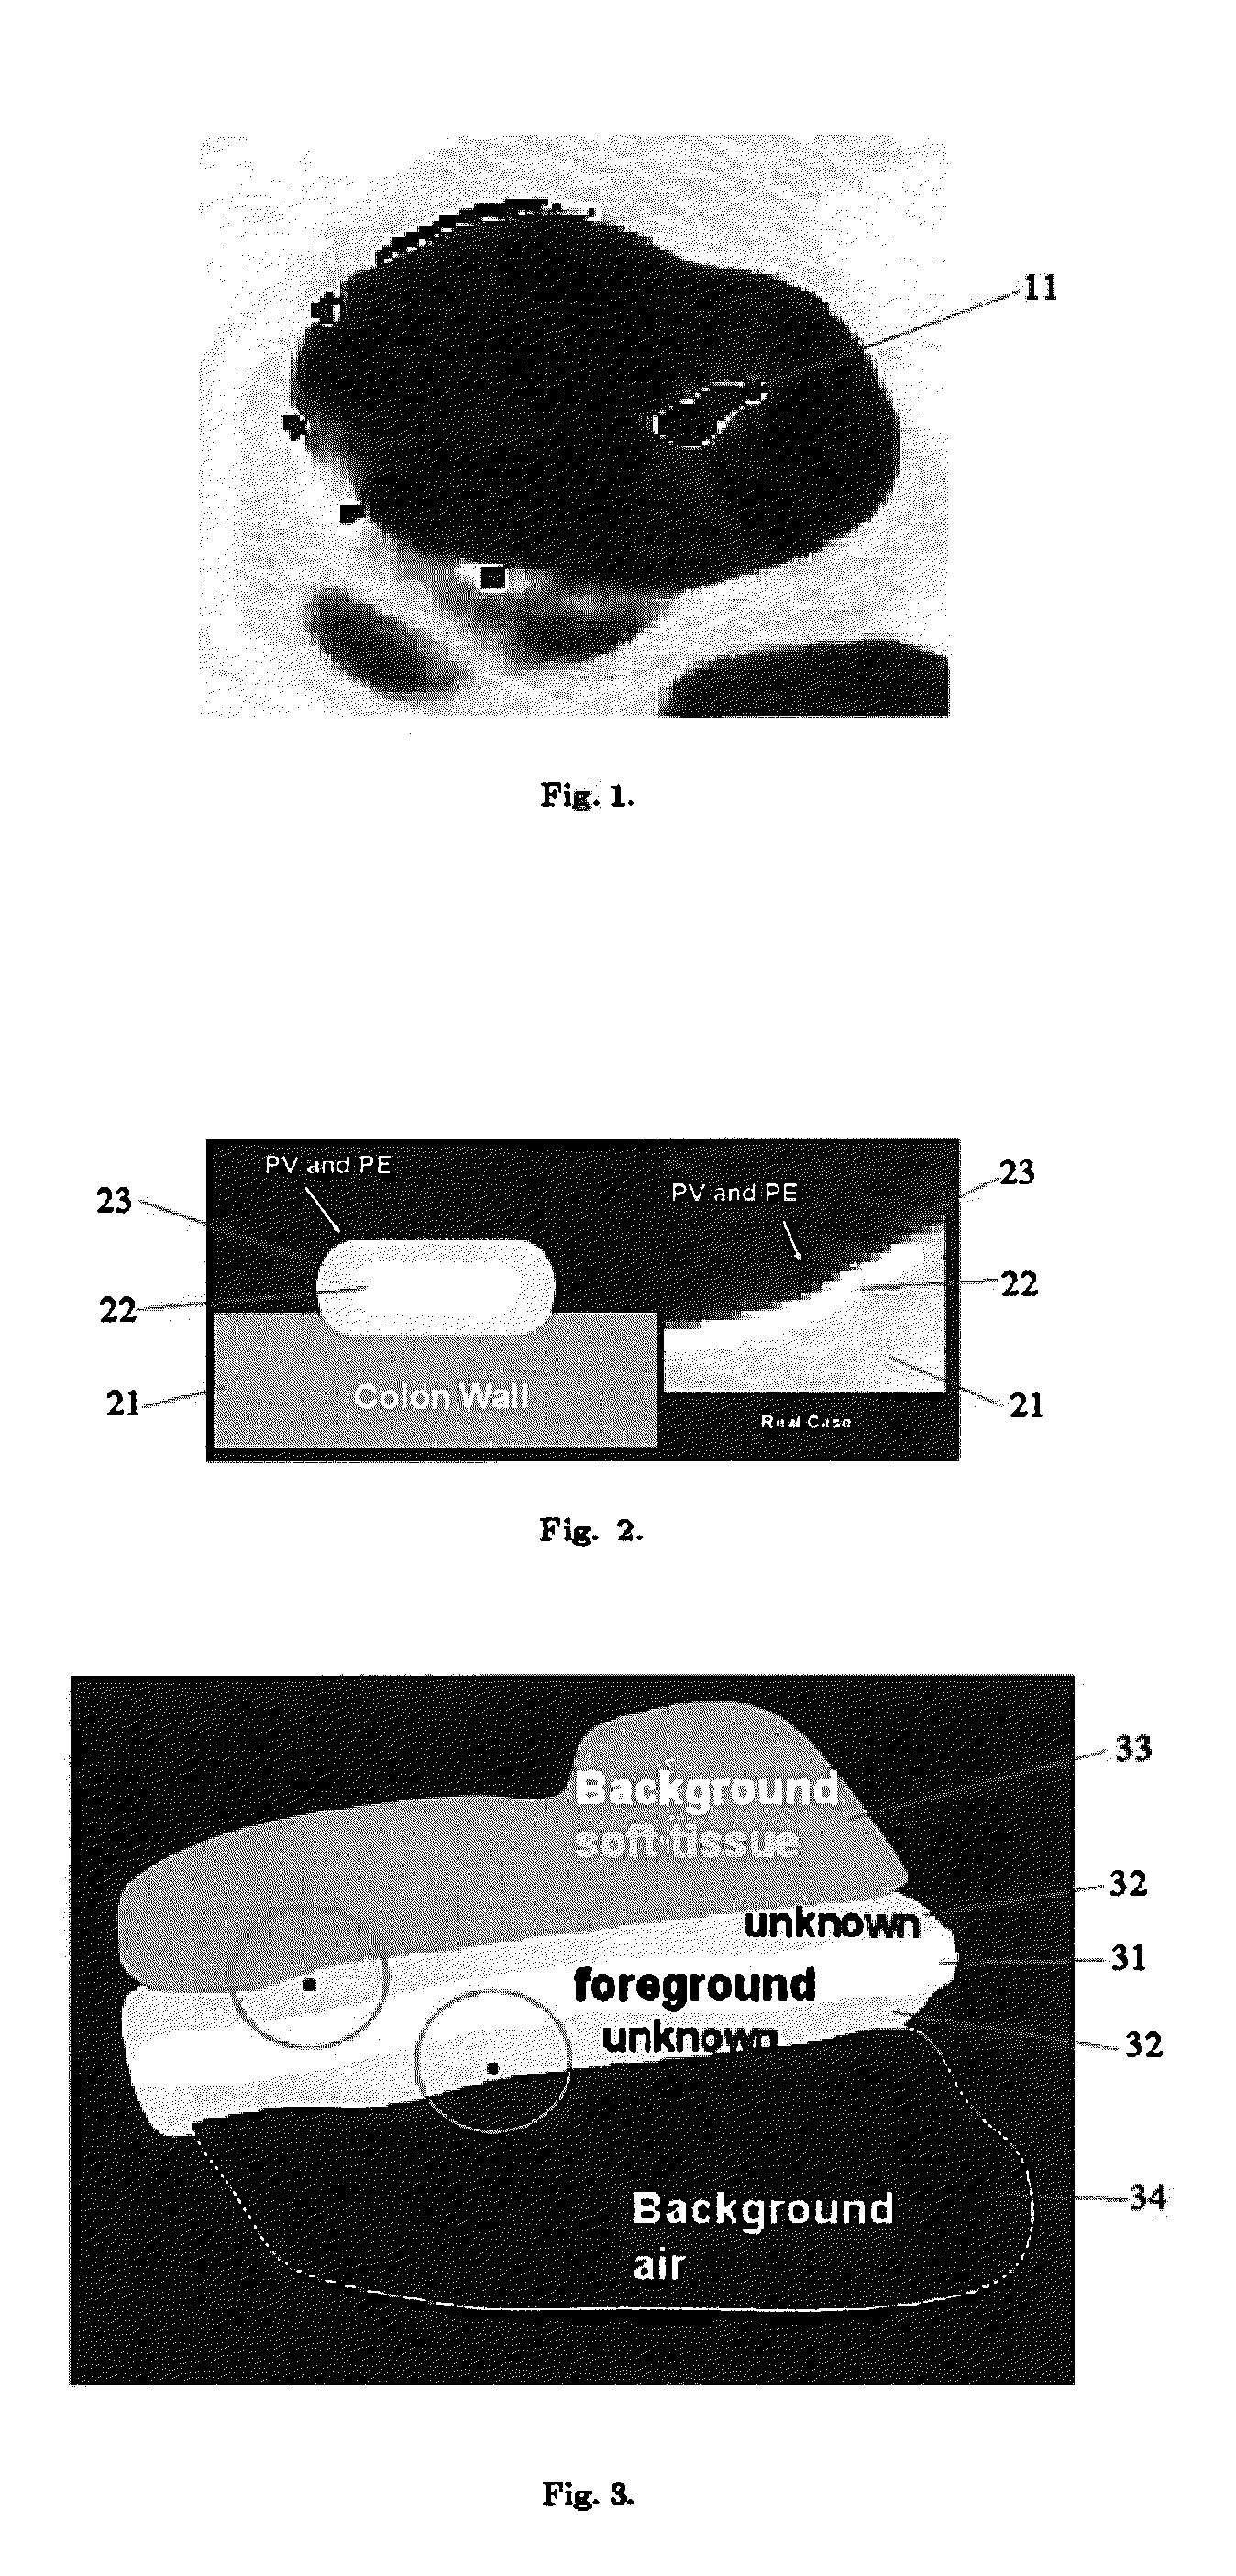 System and Method for Detecting Tagged Material Using Alpha Matting